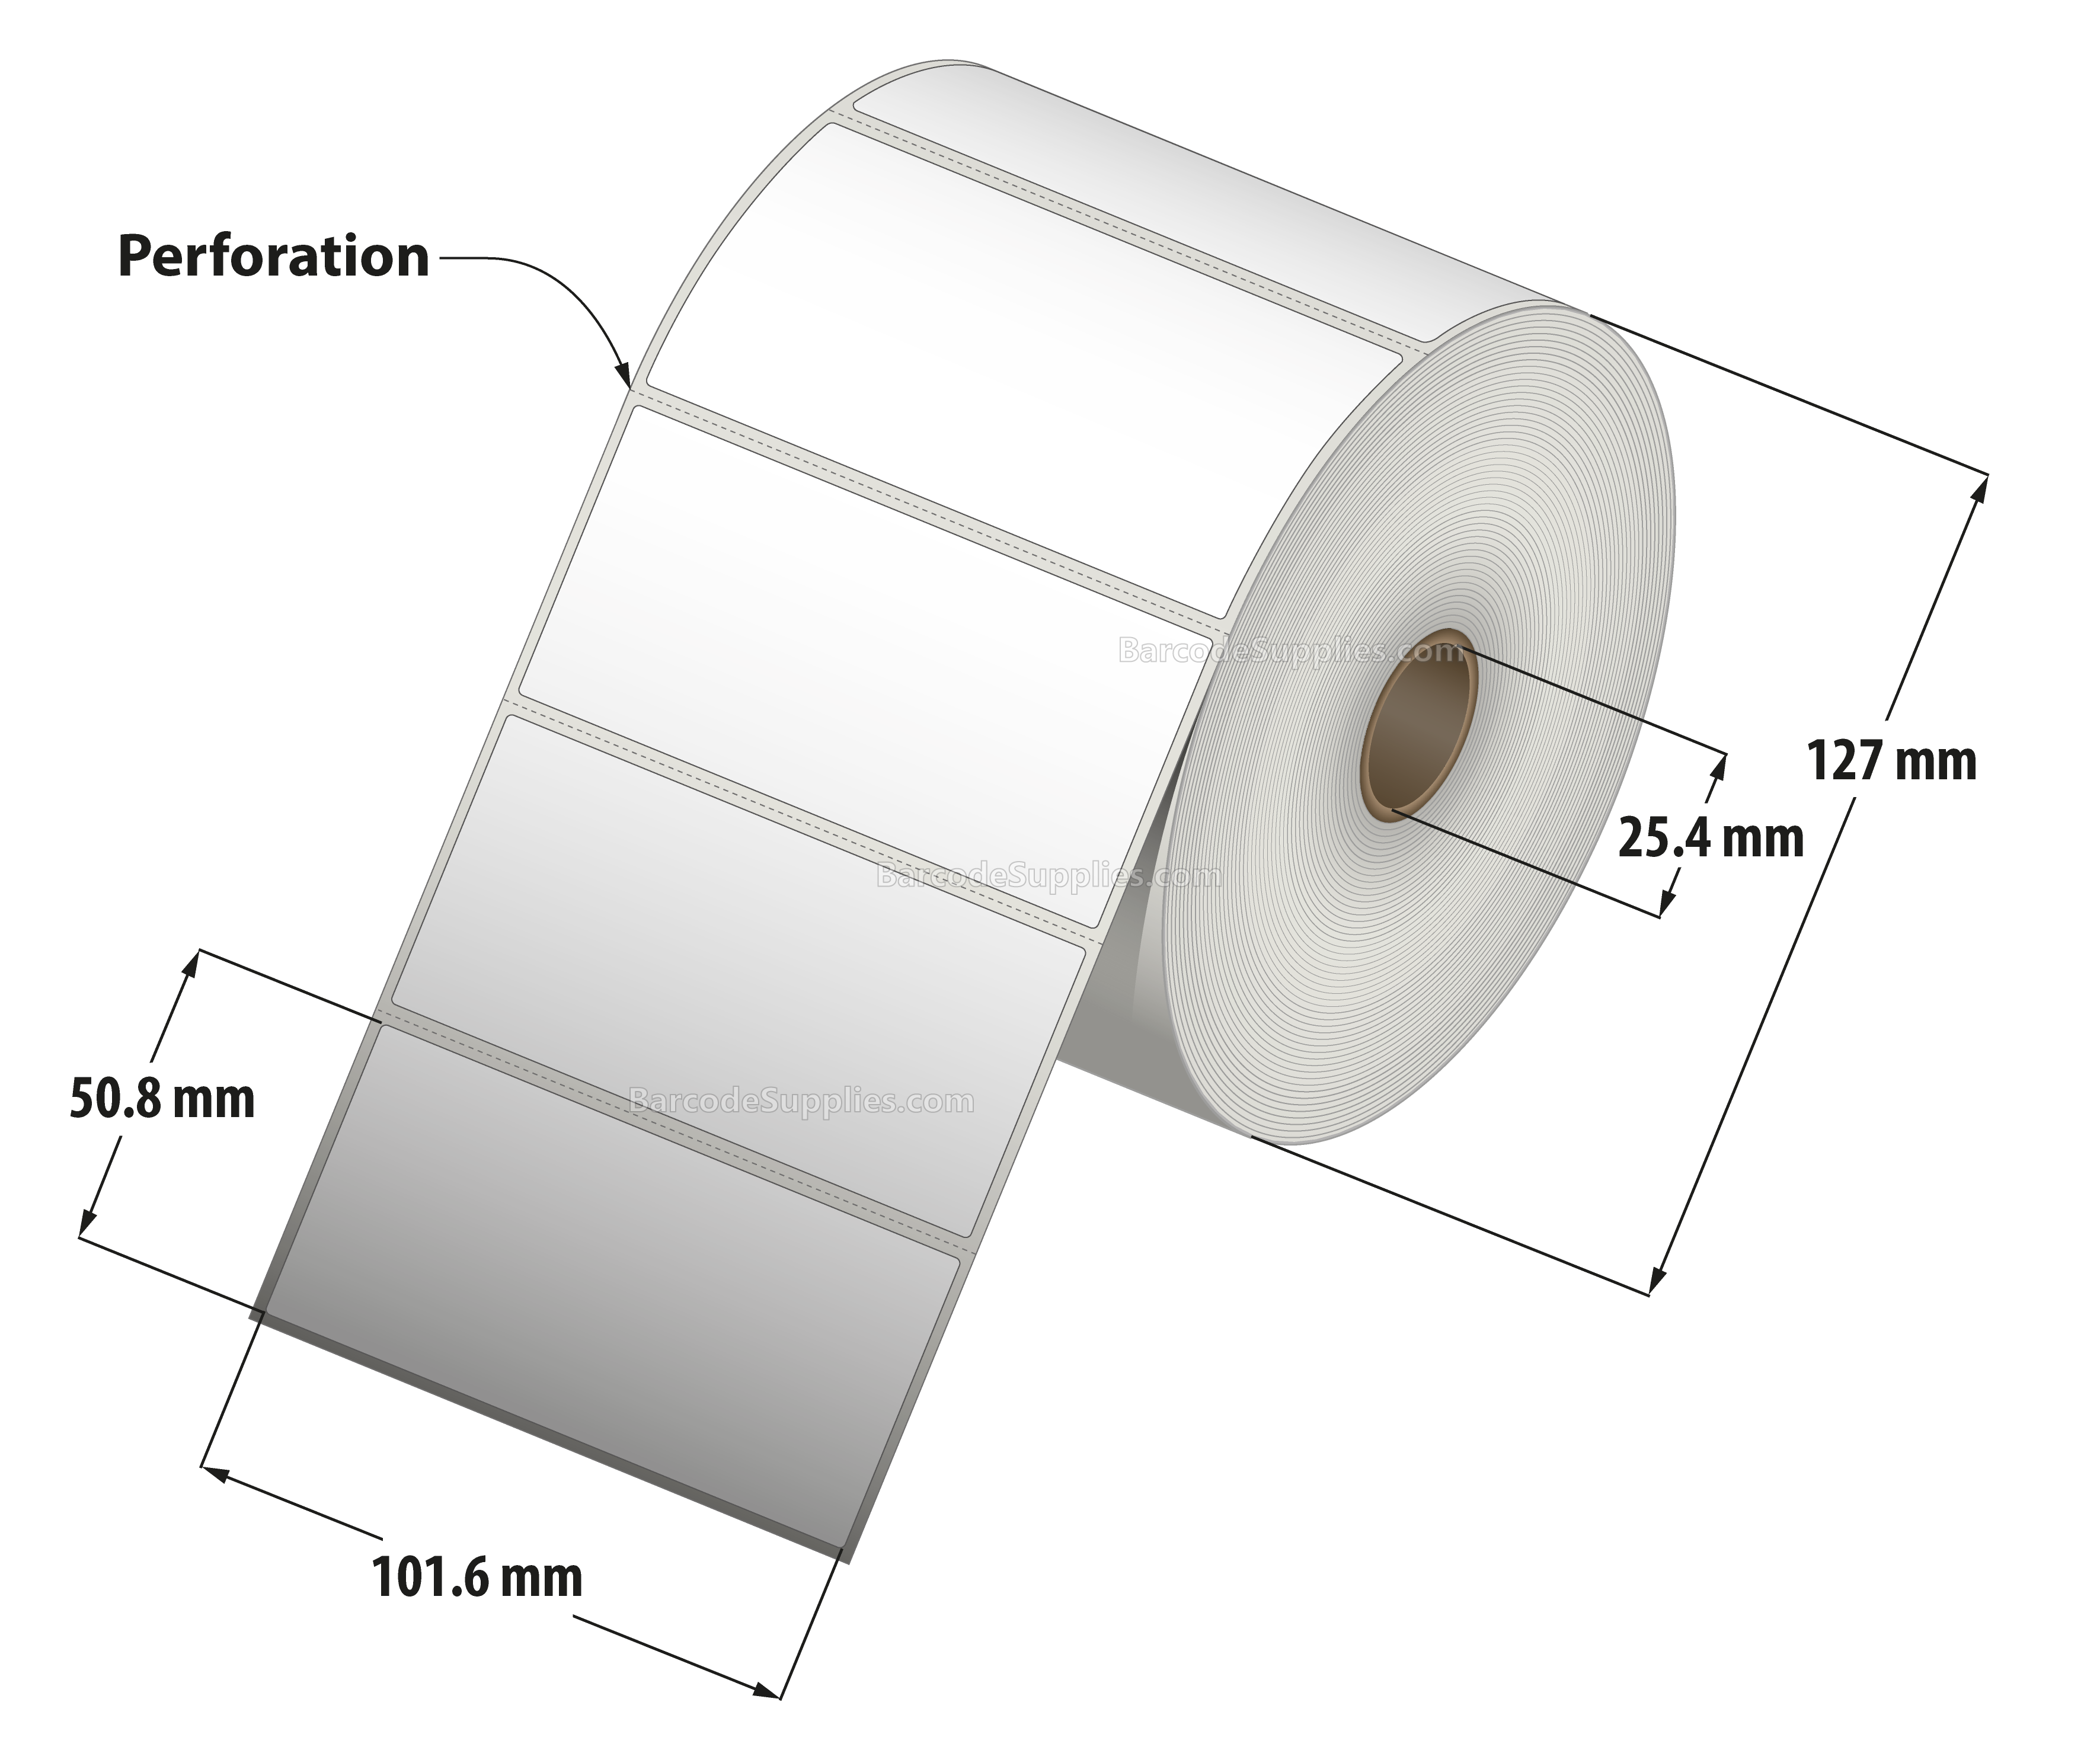 4 x 2 Direct Thermal White Labels With Acrylic Adhesive - Perforated - 1320 Labels Per Roll - Carton Of 12 Rolls - 15840 Labels Total - MPN: RD-4-2-1320-1 - BarcodeSource, Inc.